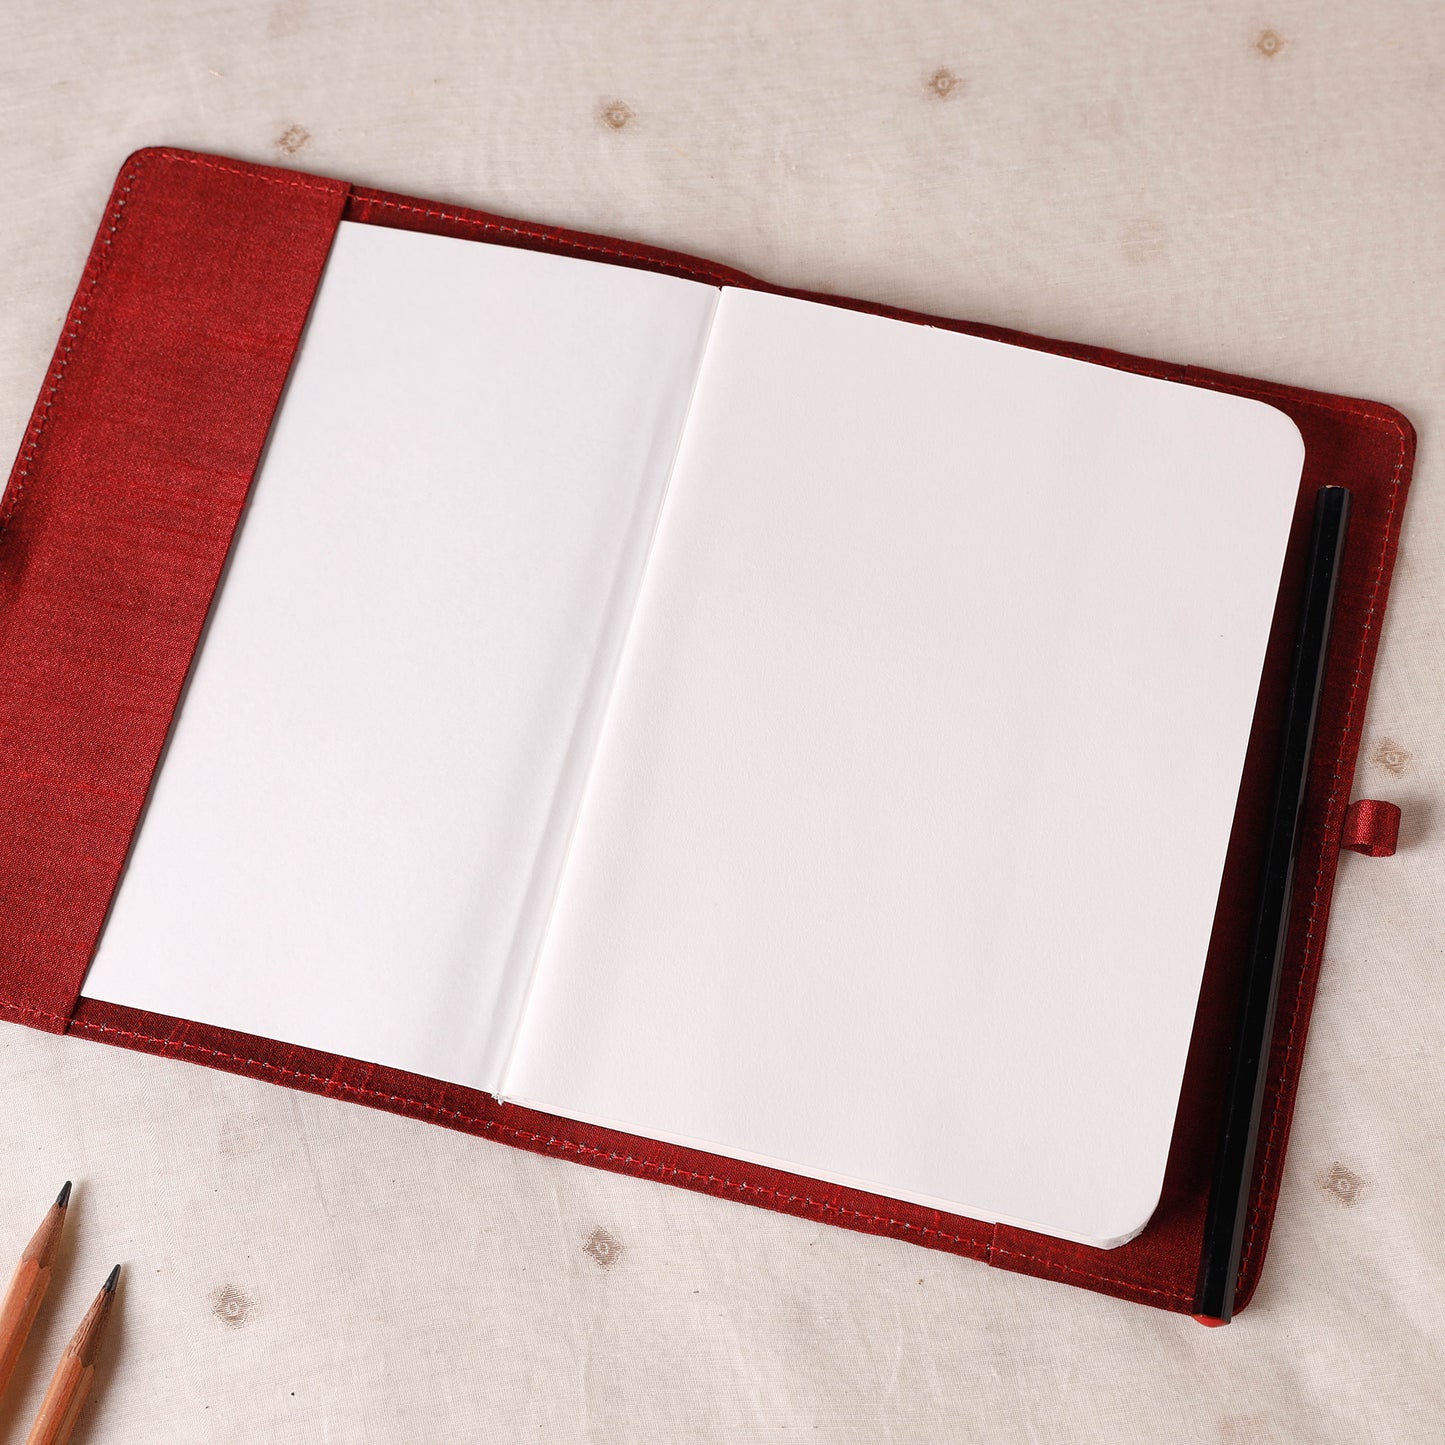  Hand Embroidery Notebook 